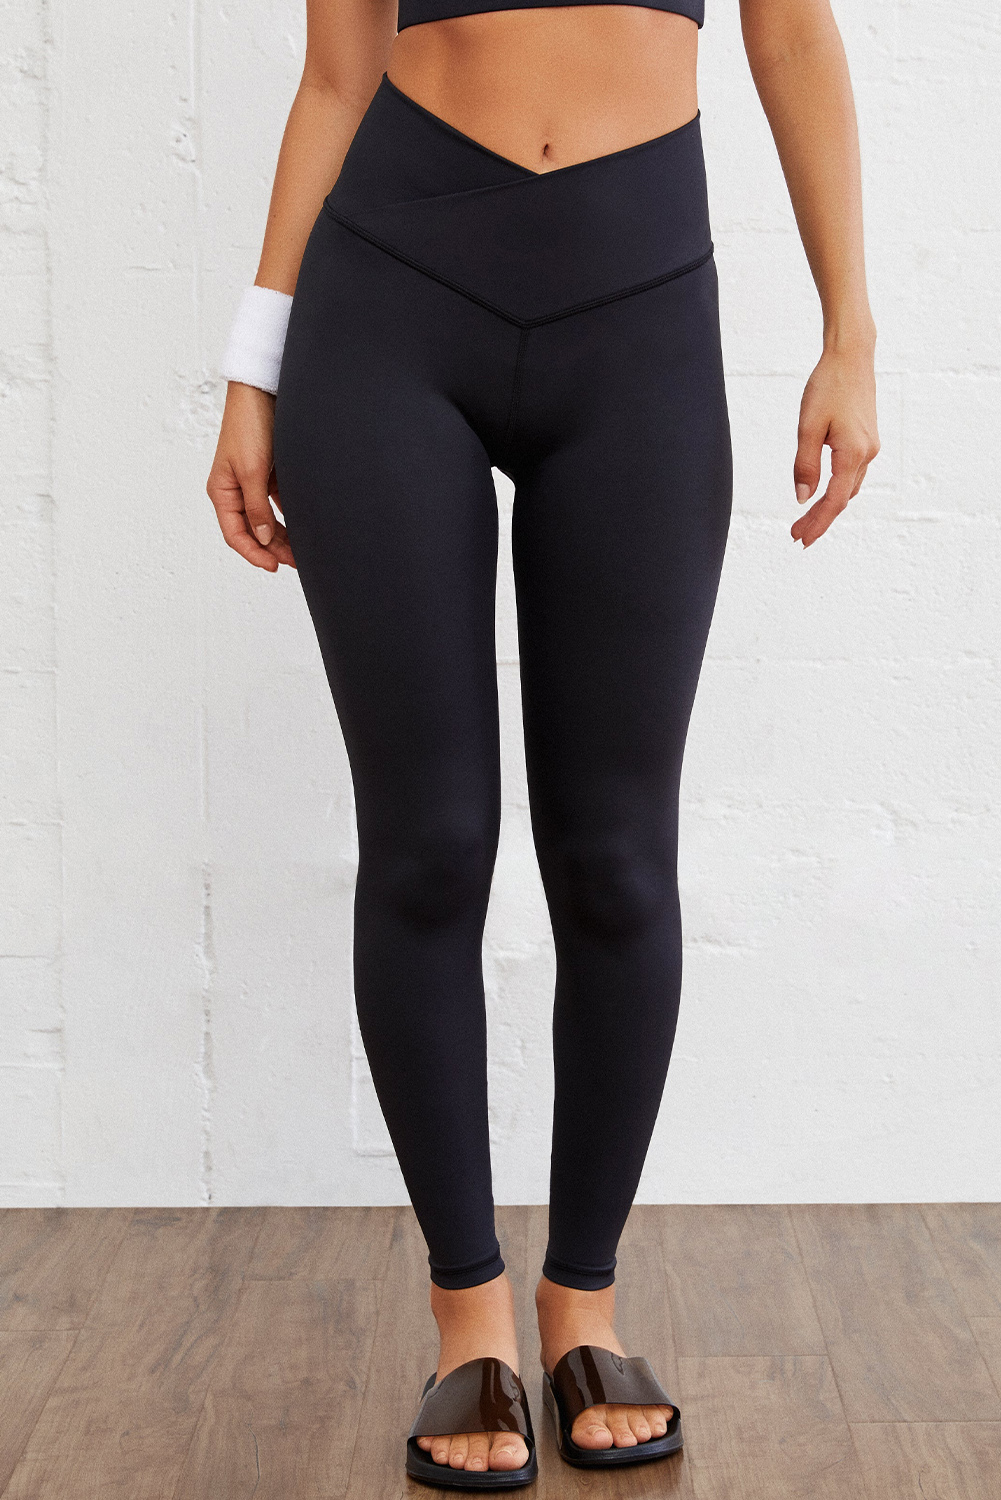 Shewin Wholesale Chic Women Black Arched Waist Seamless Active LEGGINGS